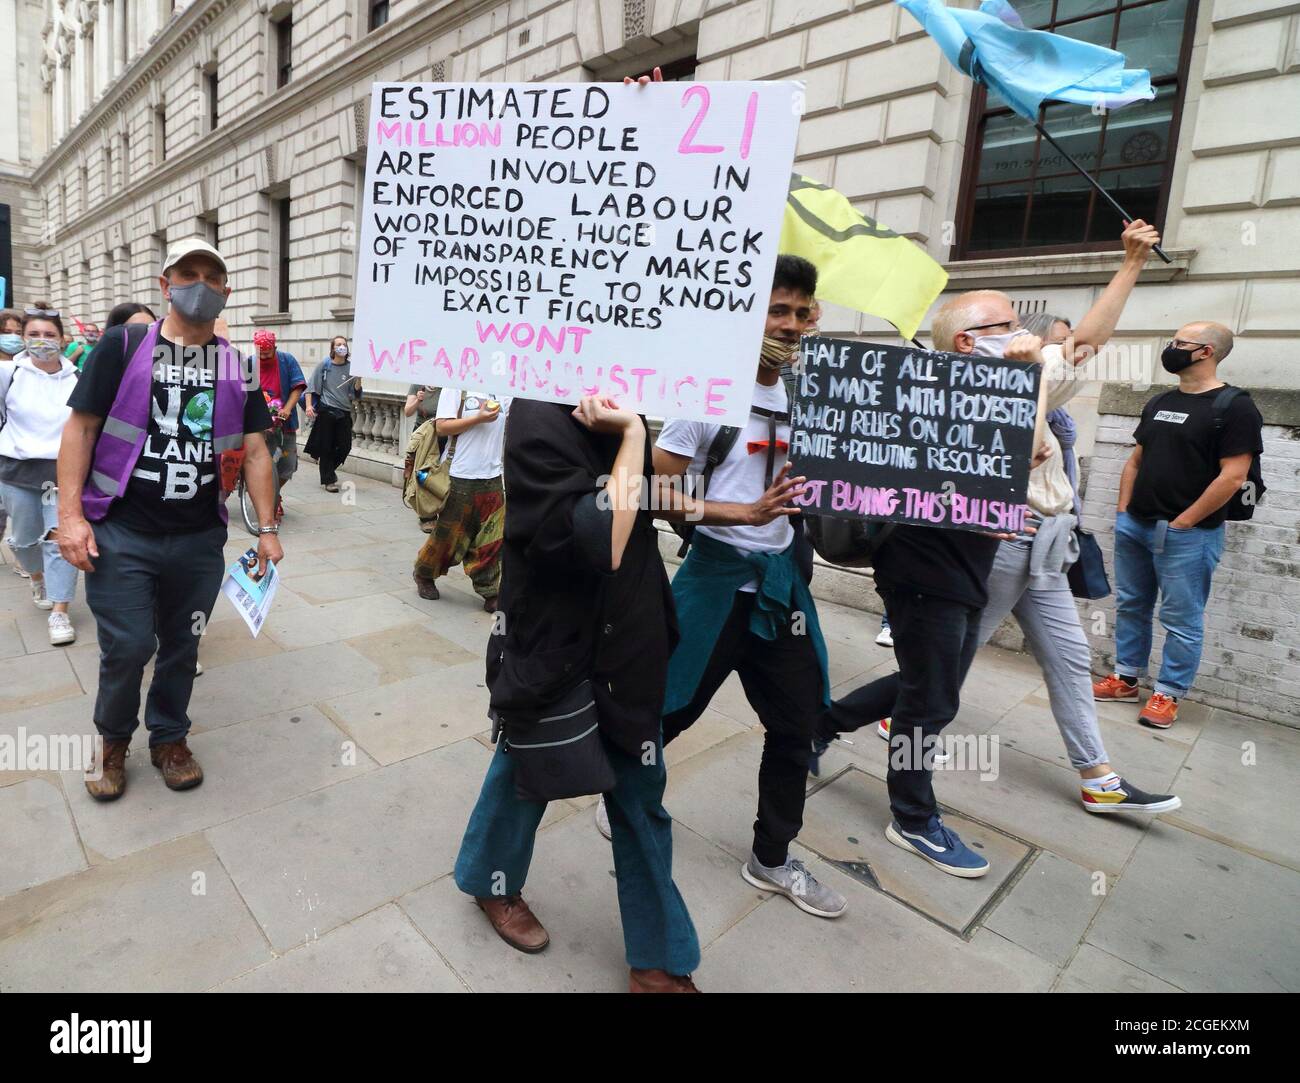 Protesters holding placards as they march near Westminster during the  Extinction Rebellion demonstration.Extinction Rebellion demonstrators march  to Westminster as part of their Redress the Injustice day of protest,  opposing the fashion industry's